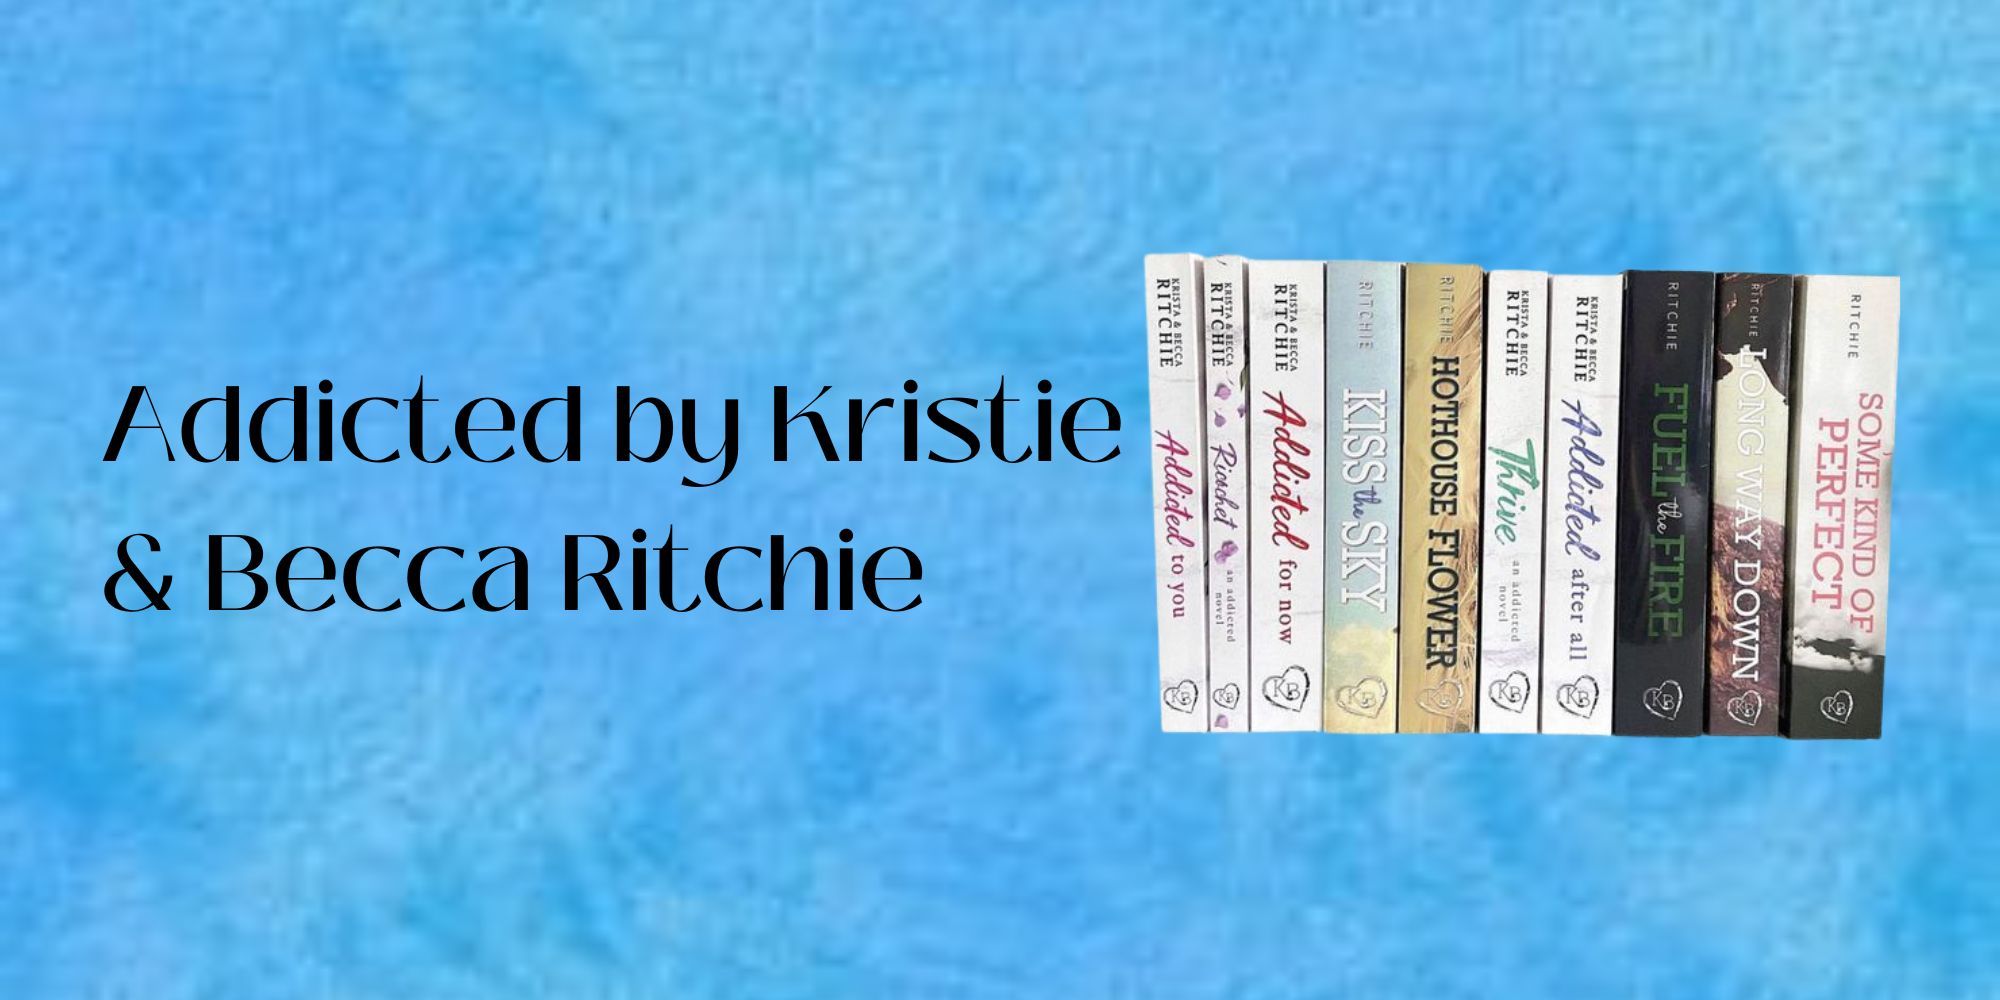 Addicted Series by Kristie & Becca Ritchie